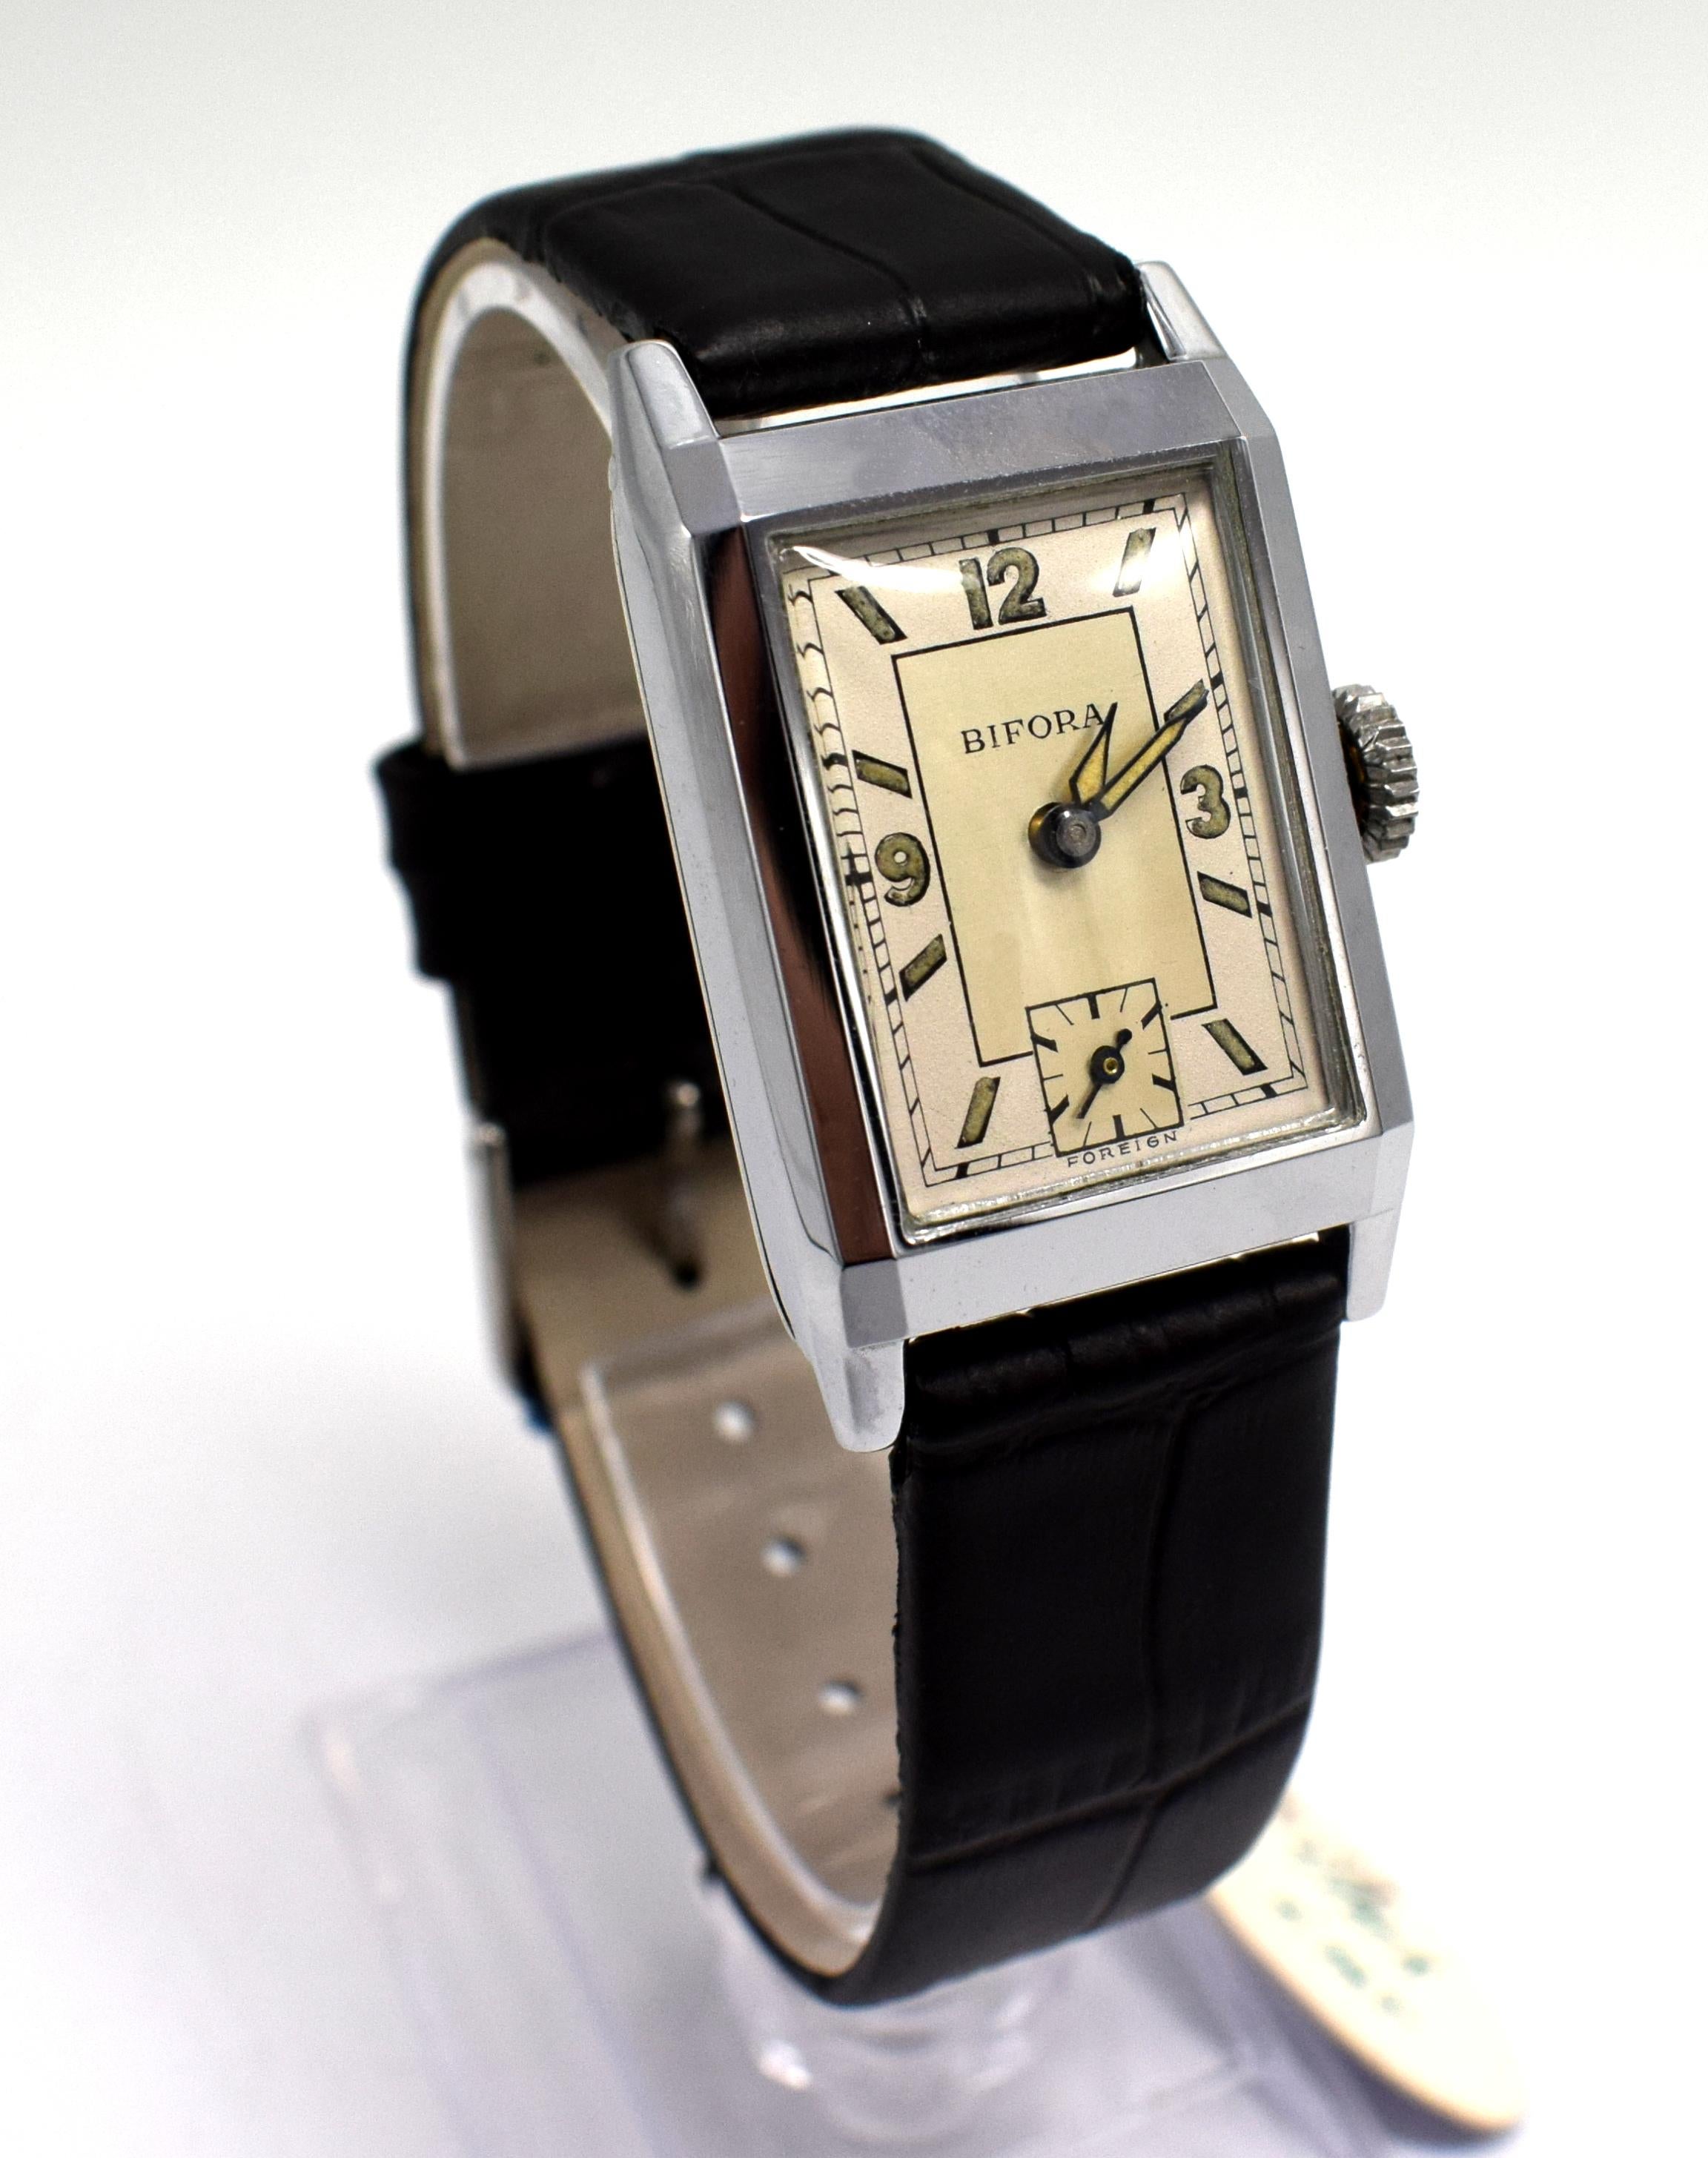 This watch is the last wave of Art Deco watches we sourced this year, an incredible find of old/new watches dating from the 1930's. Never been sold, marketed or worn, In this condition, watches from those years are unique and extremely difficult to